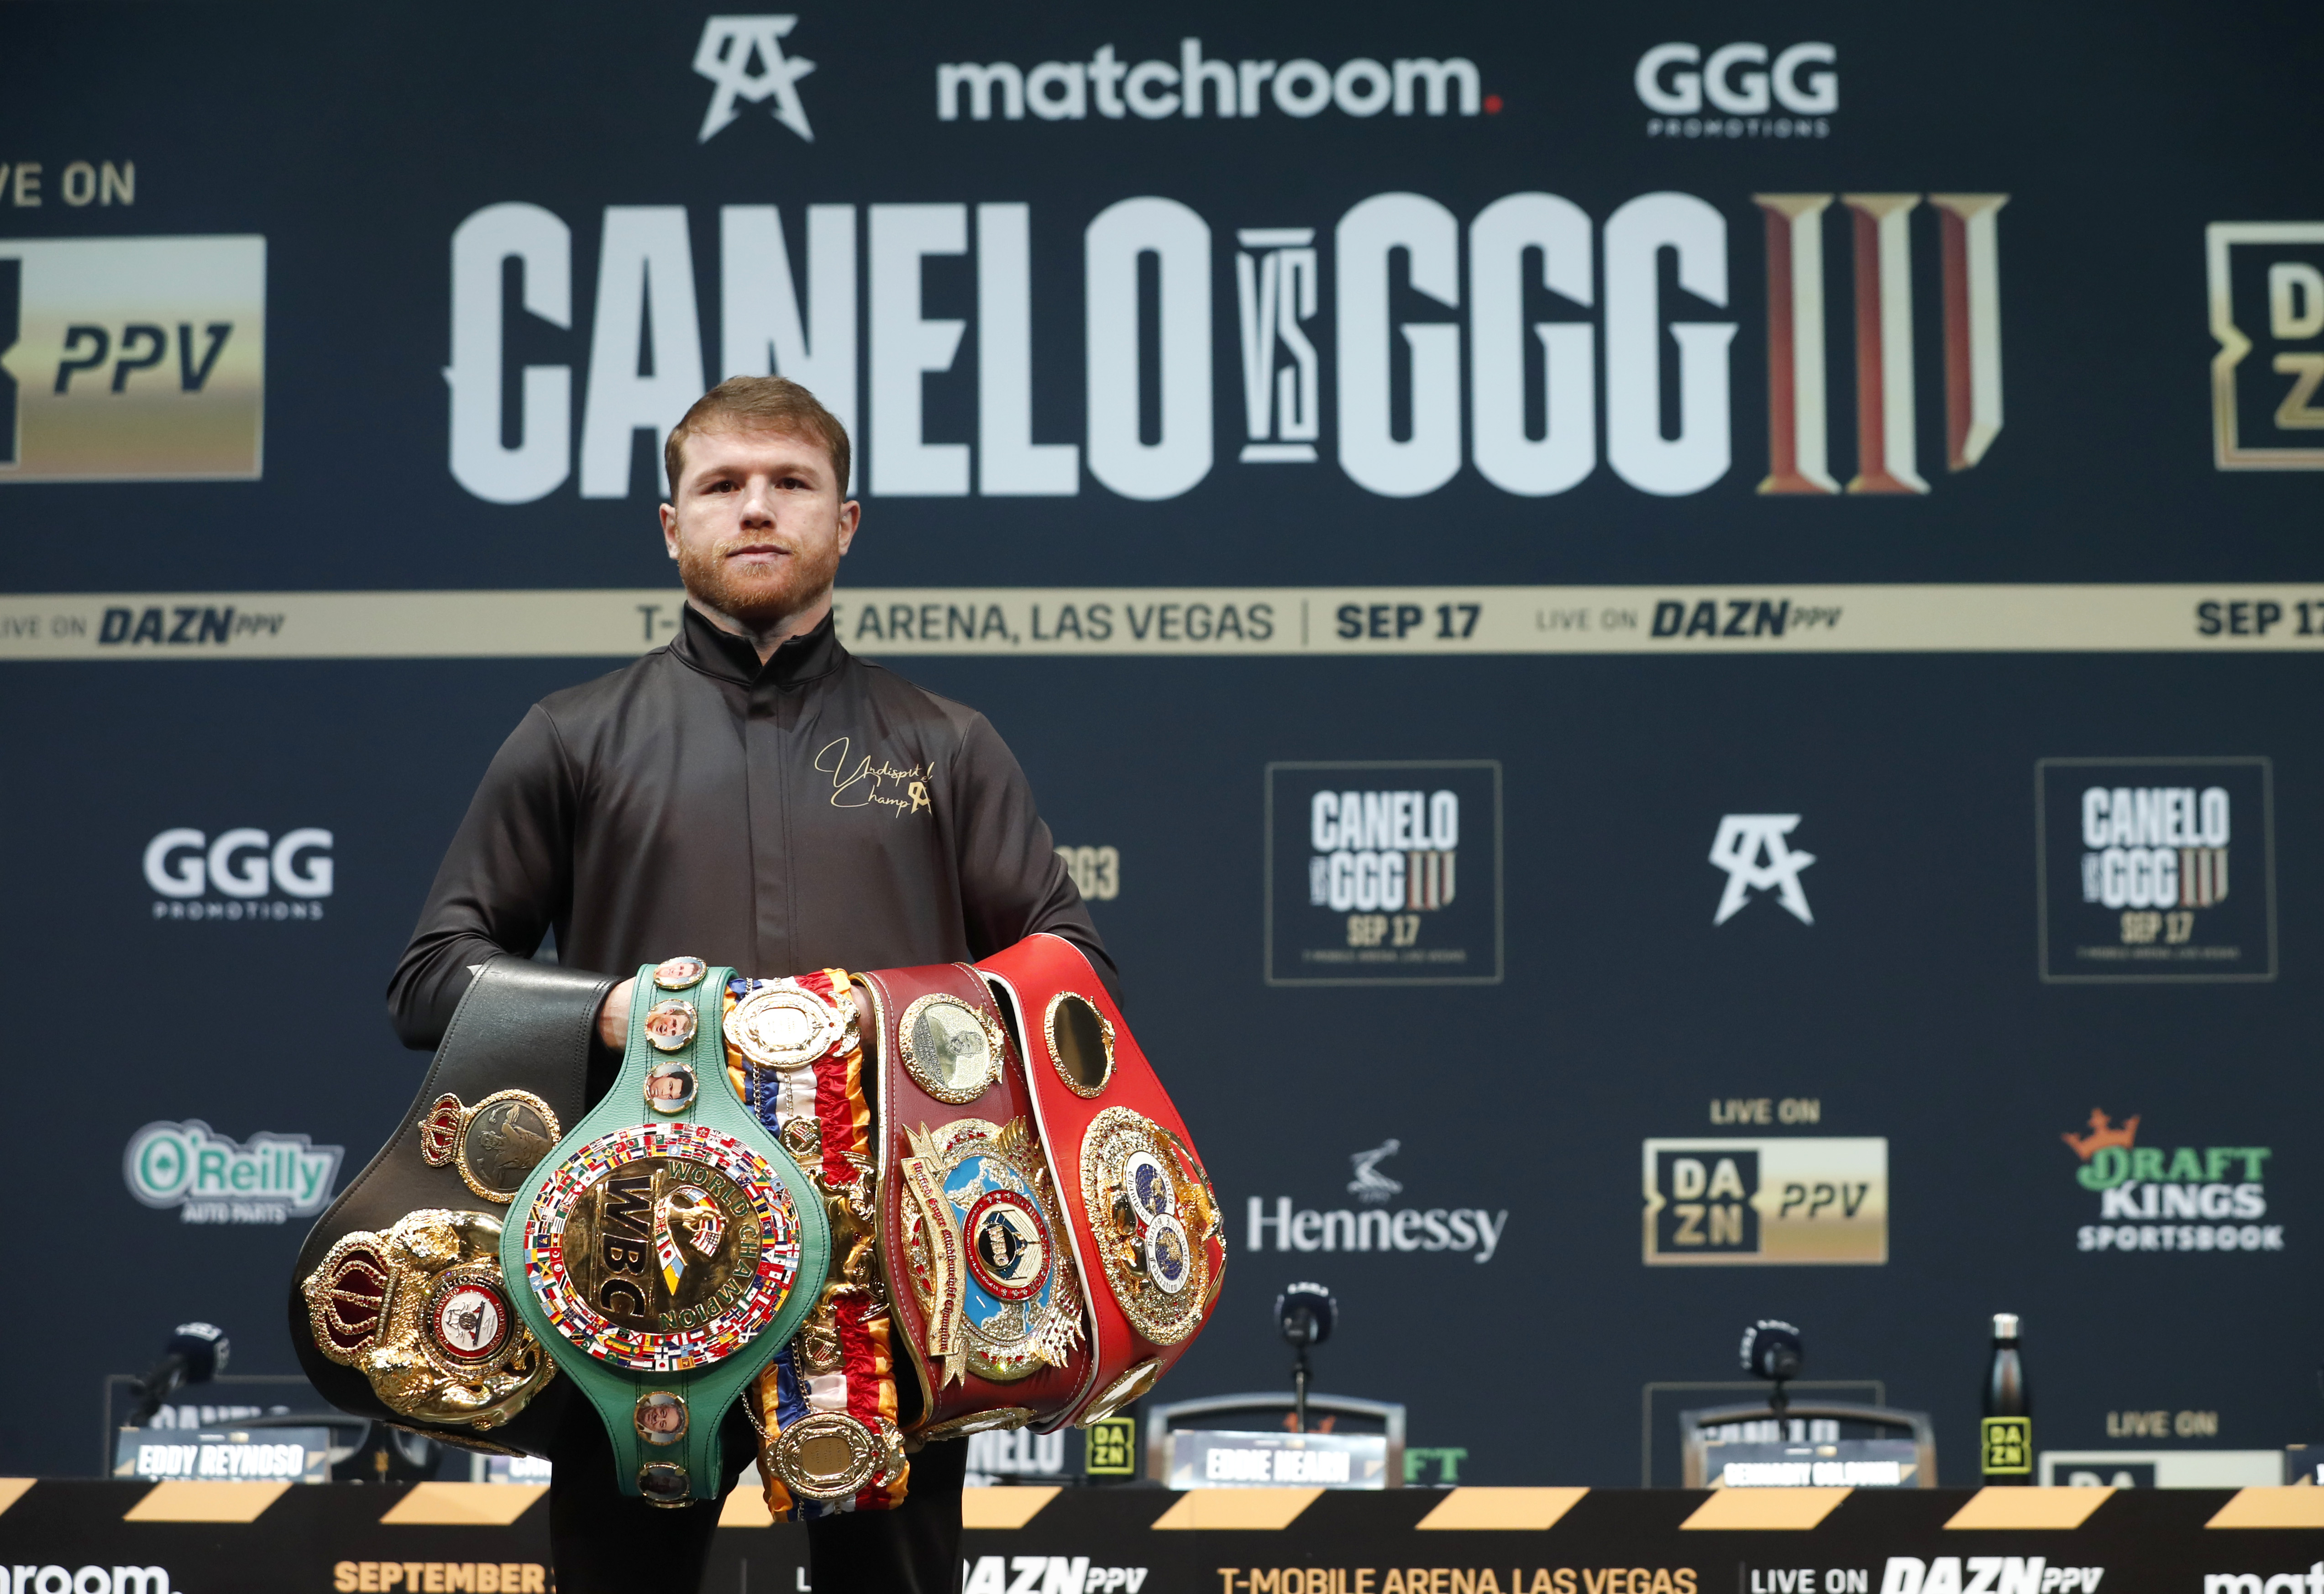 Canelo Alvarez is a massive betting favorite over GGG in their trilogy&nbsp;bout